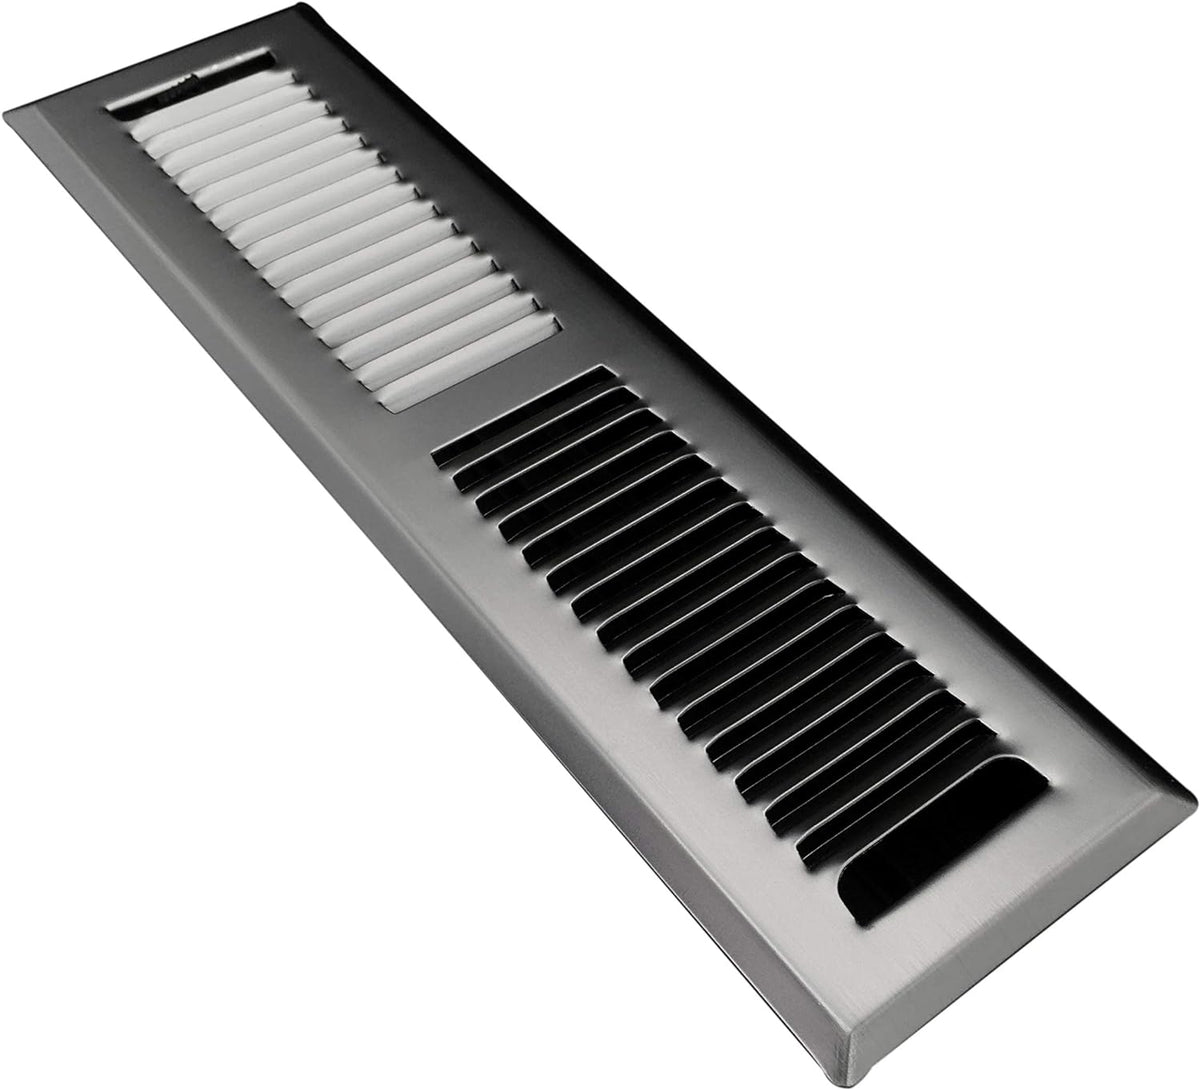 2&quot; X 12&quot; Modern Floor Register Grille with Dampers - Contempo Slotted Grate - HVAC Vent Duct Cover - Chrome